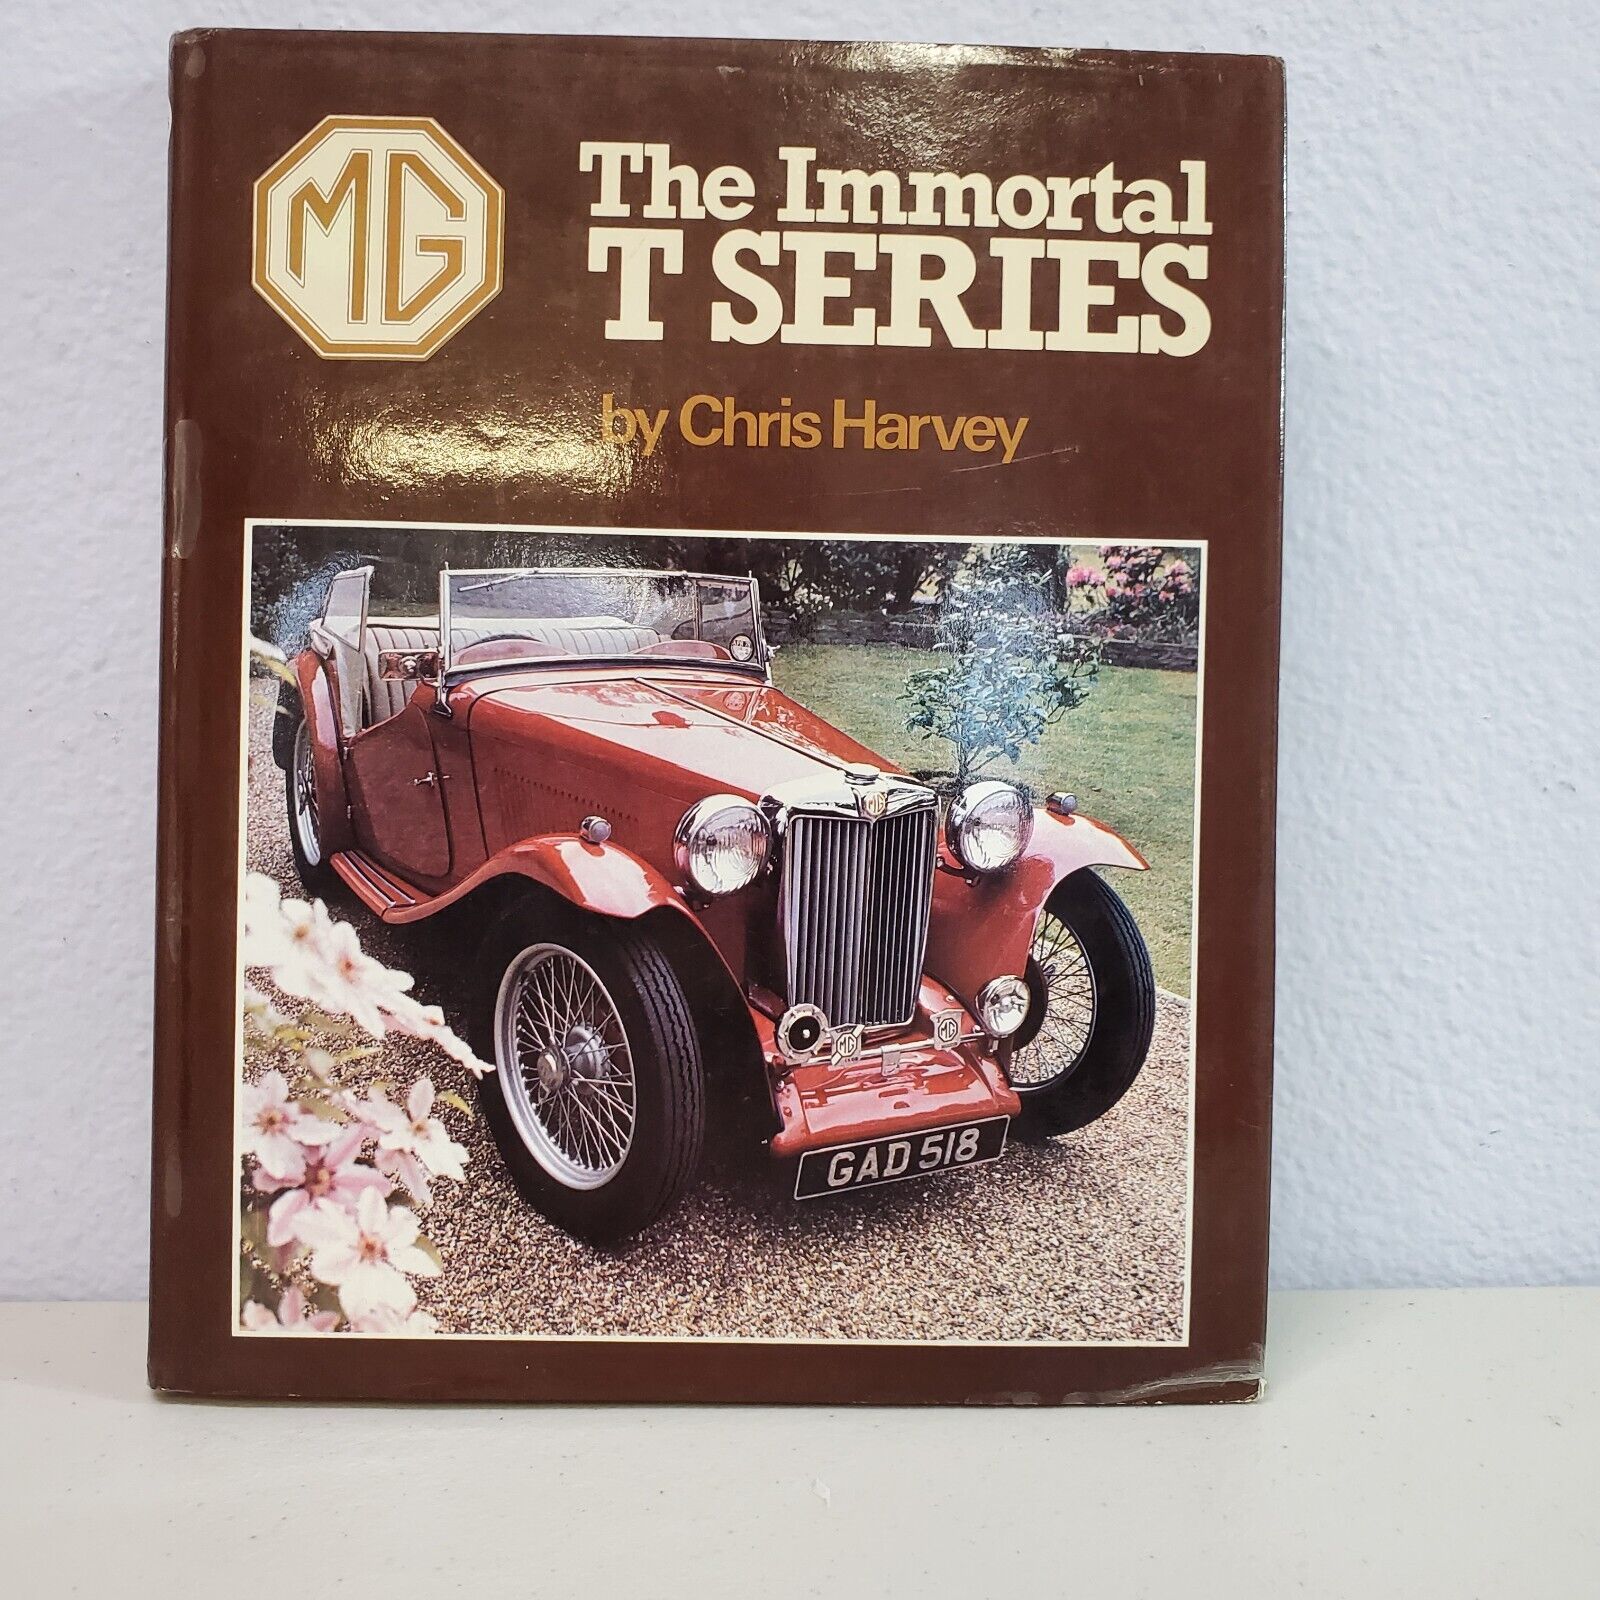 MG The Immortal T Series by Chris Harvey  VERY NICE HARD COVER & DUST JACKET